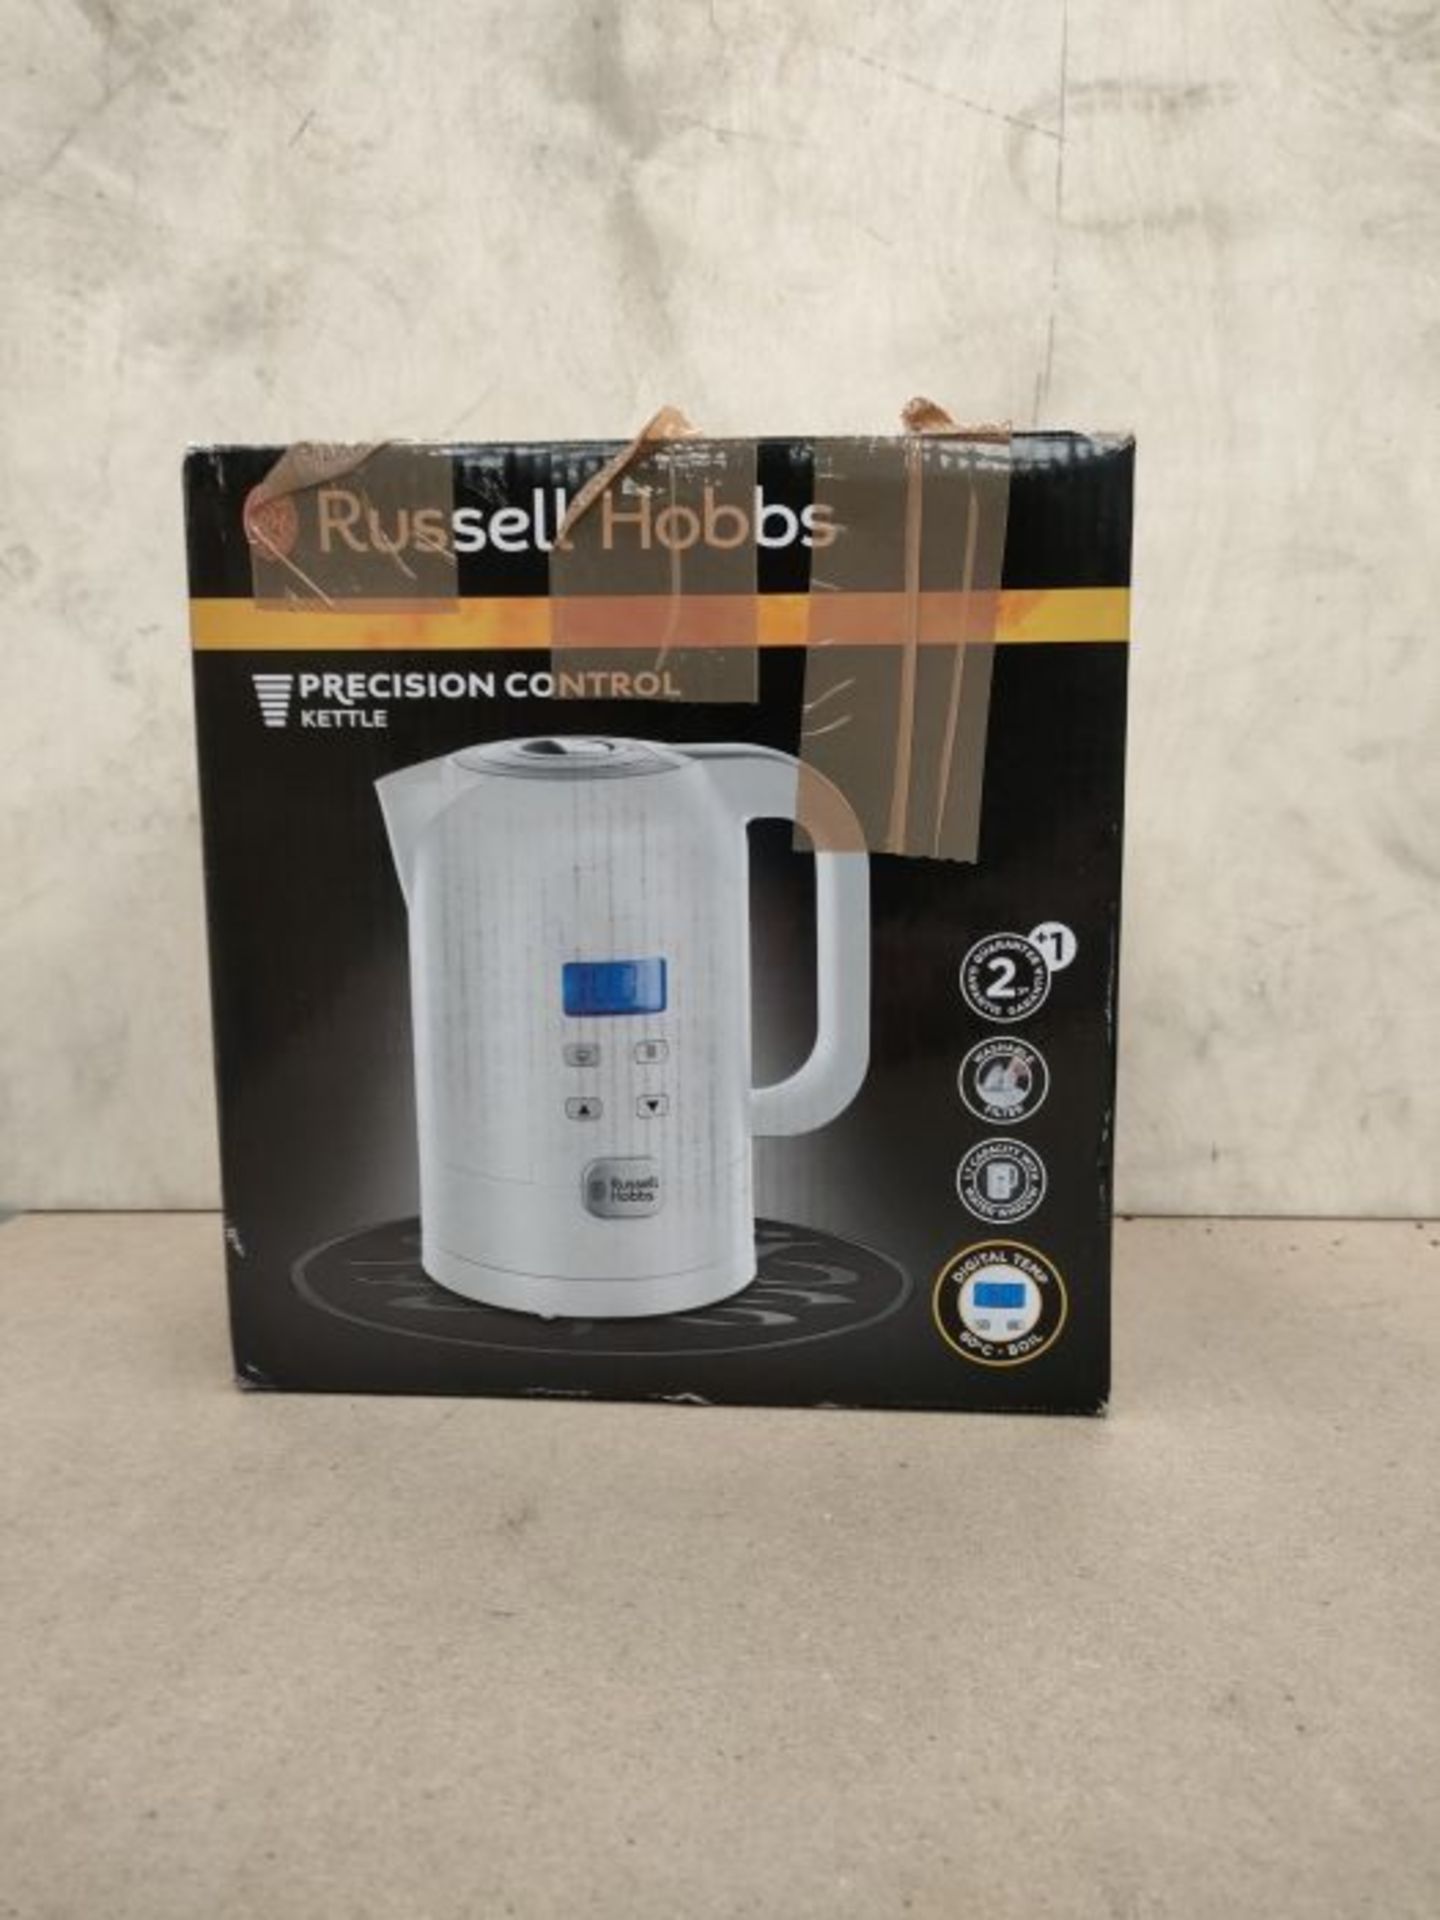 Russell Hobbs 21150-70 electrical kettle - electric kettles - Image 2 of 3